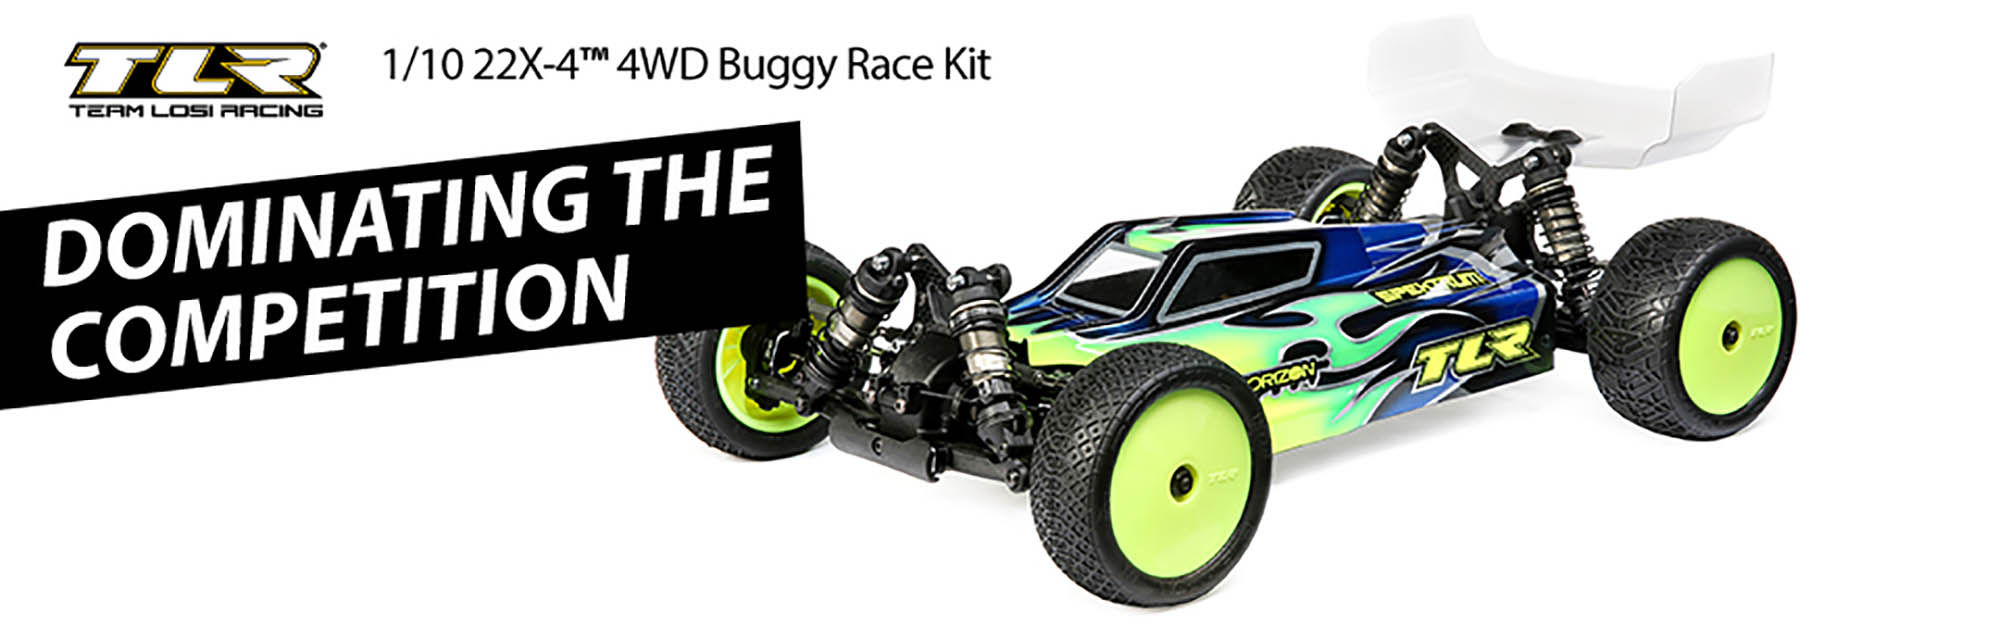 TLR <sup> ® </sup> 1/10 22X-4 Race Buggy Kit